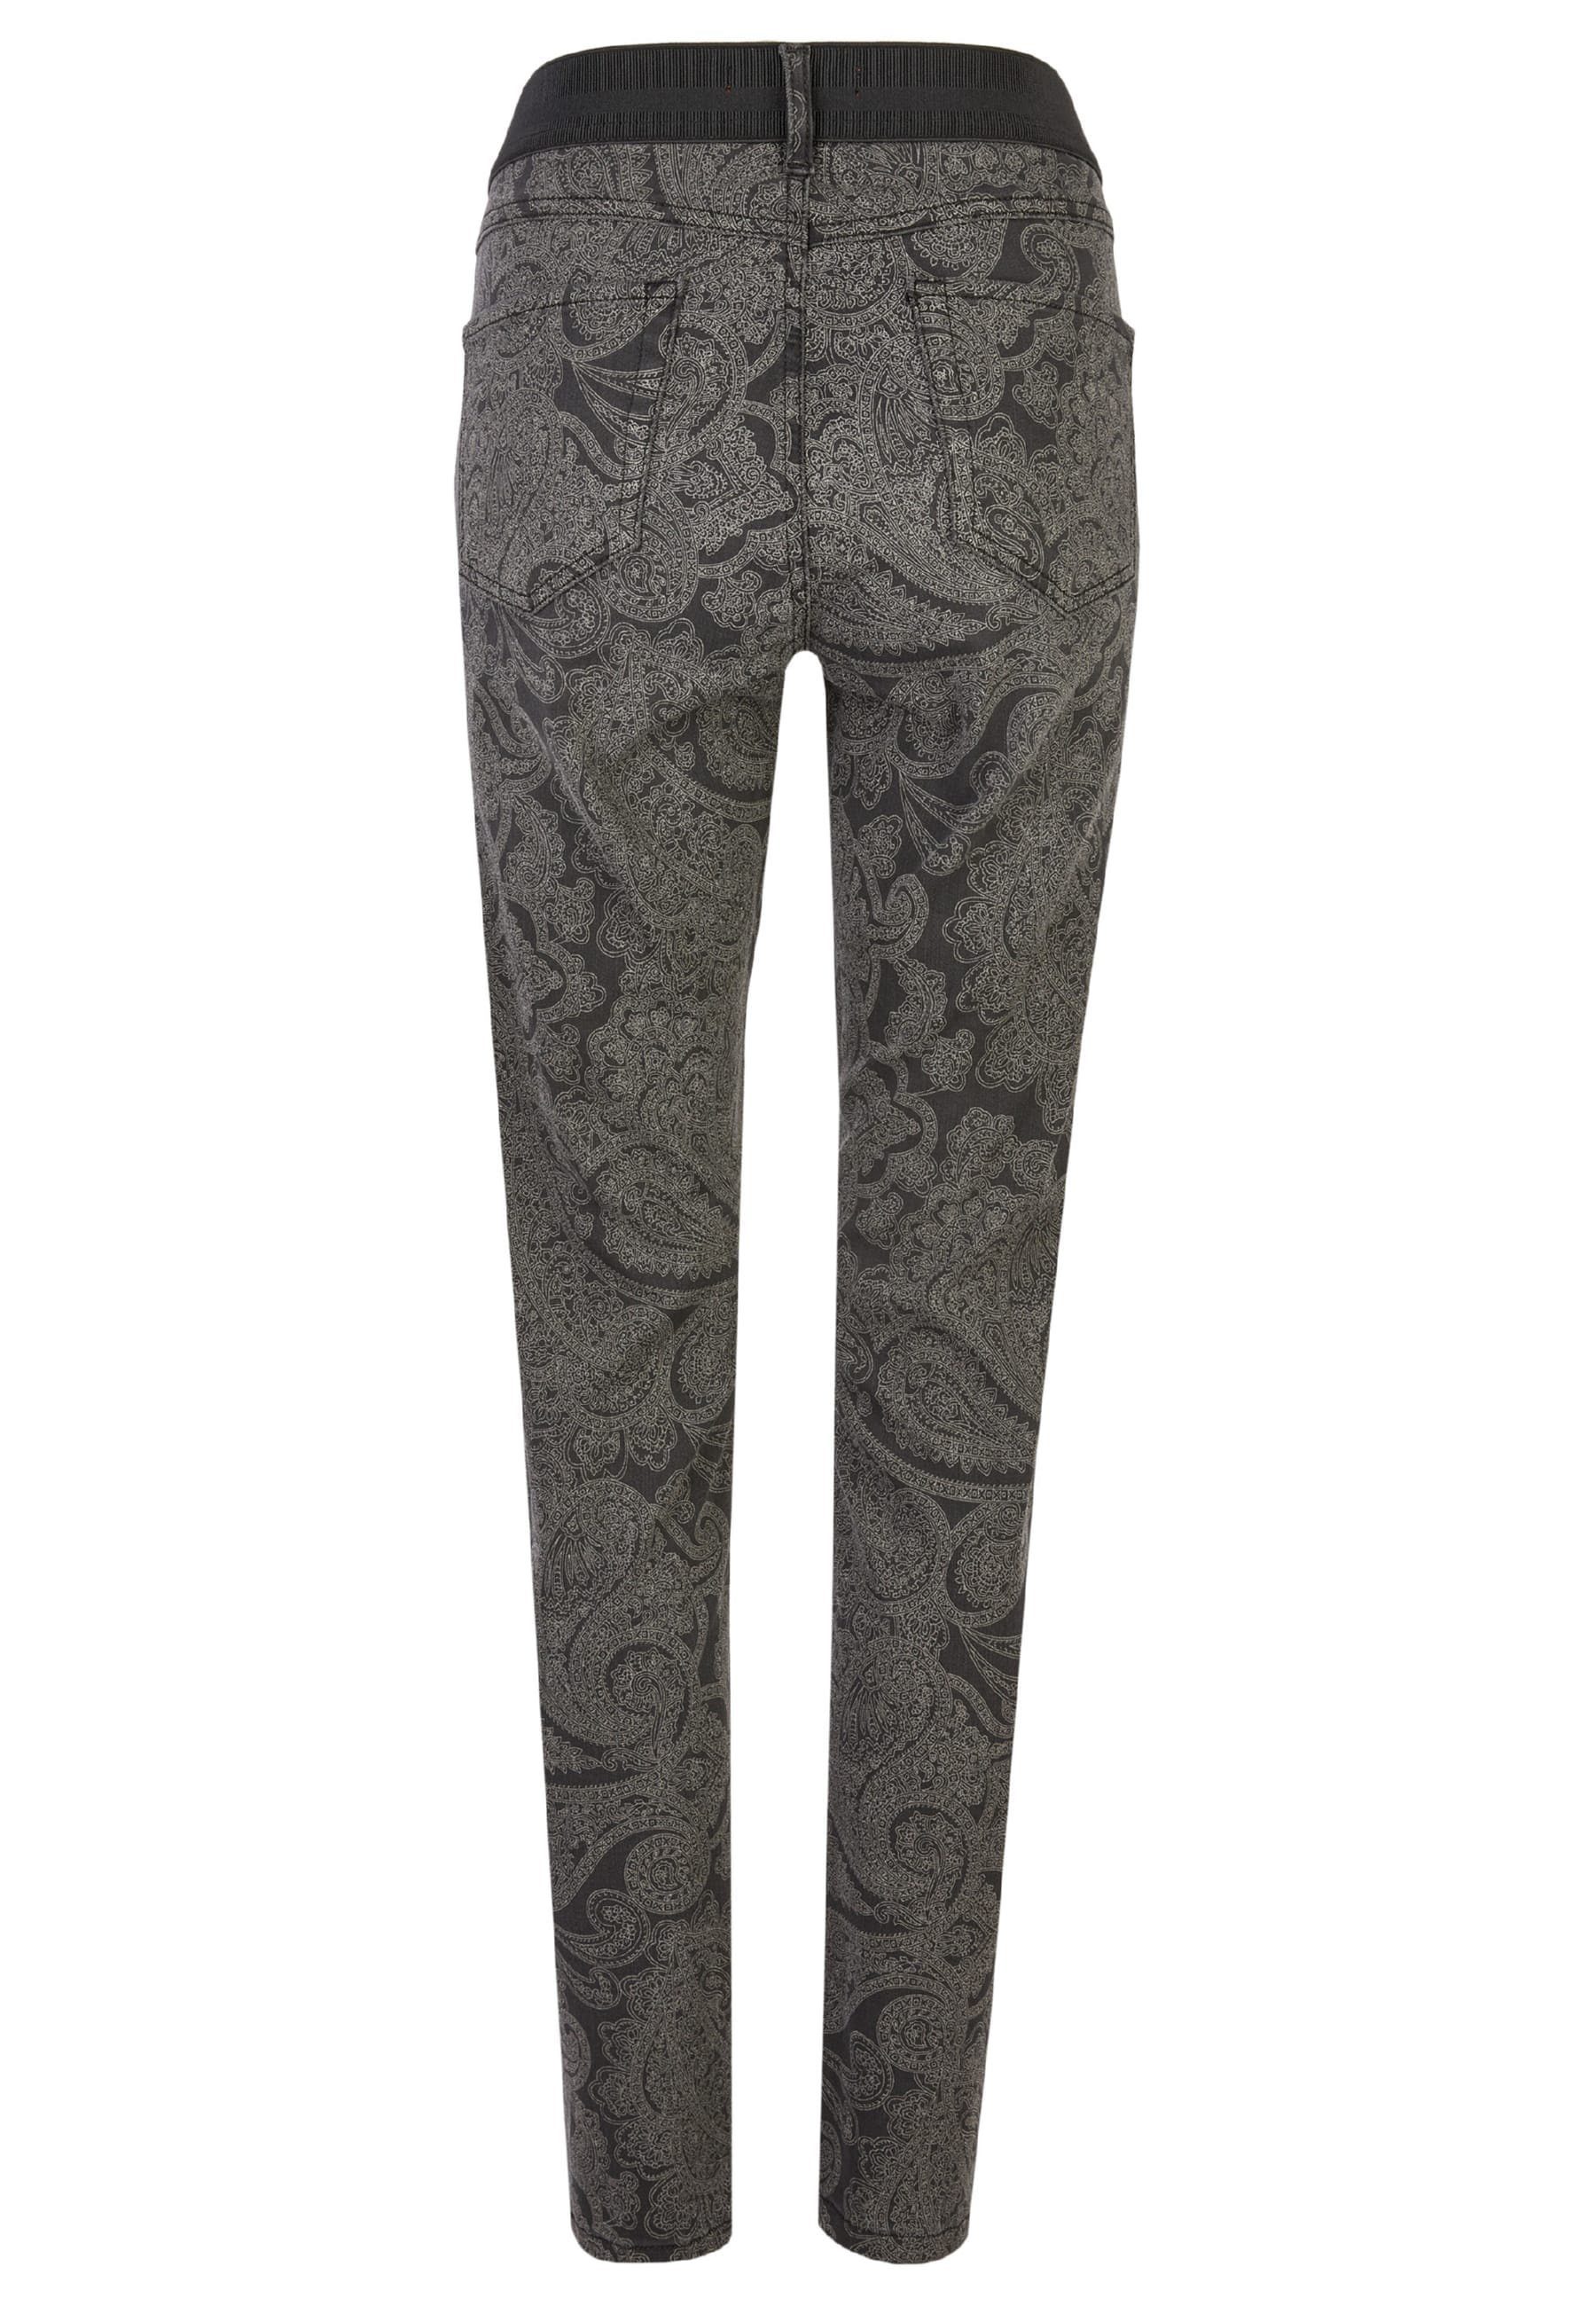 mit Jeans mit Size Paisley-Muster anthrazit One Slim-fit-Jeans Label-Applikationen ANGELS